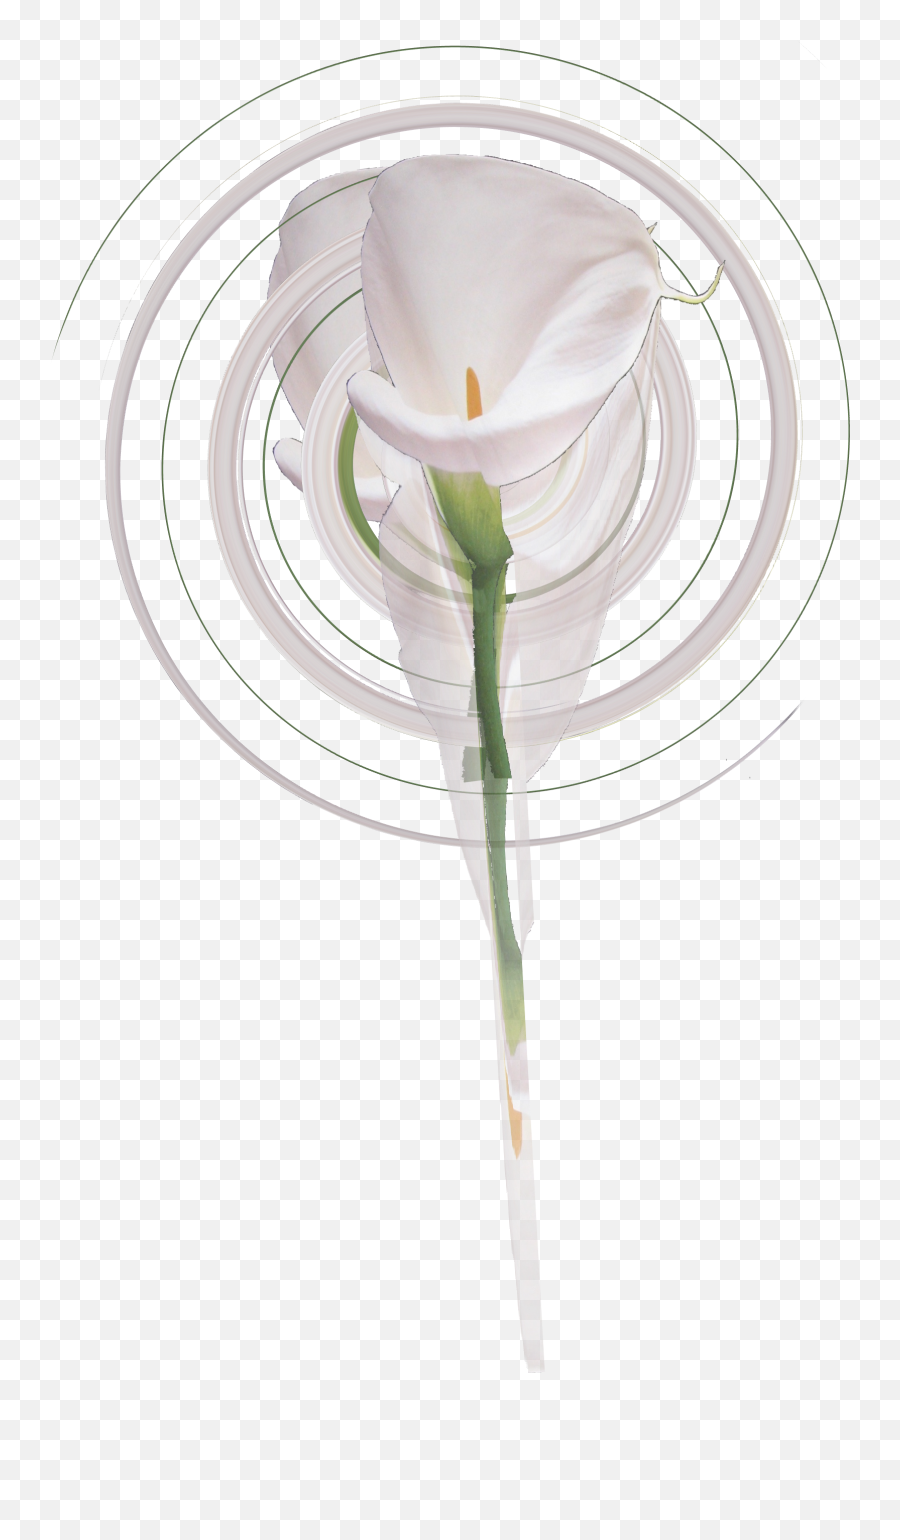 Filelily Spinpng - Wikimedia Commons Emoji,Lilies Png